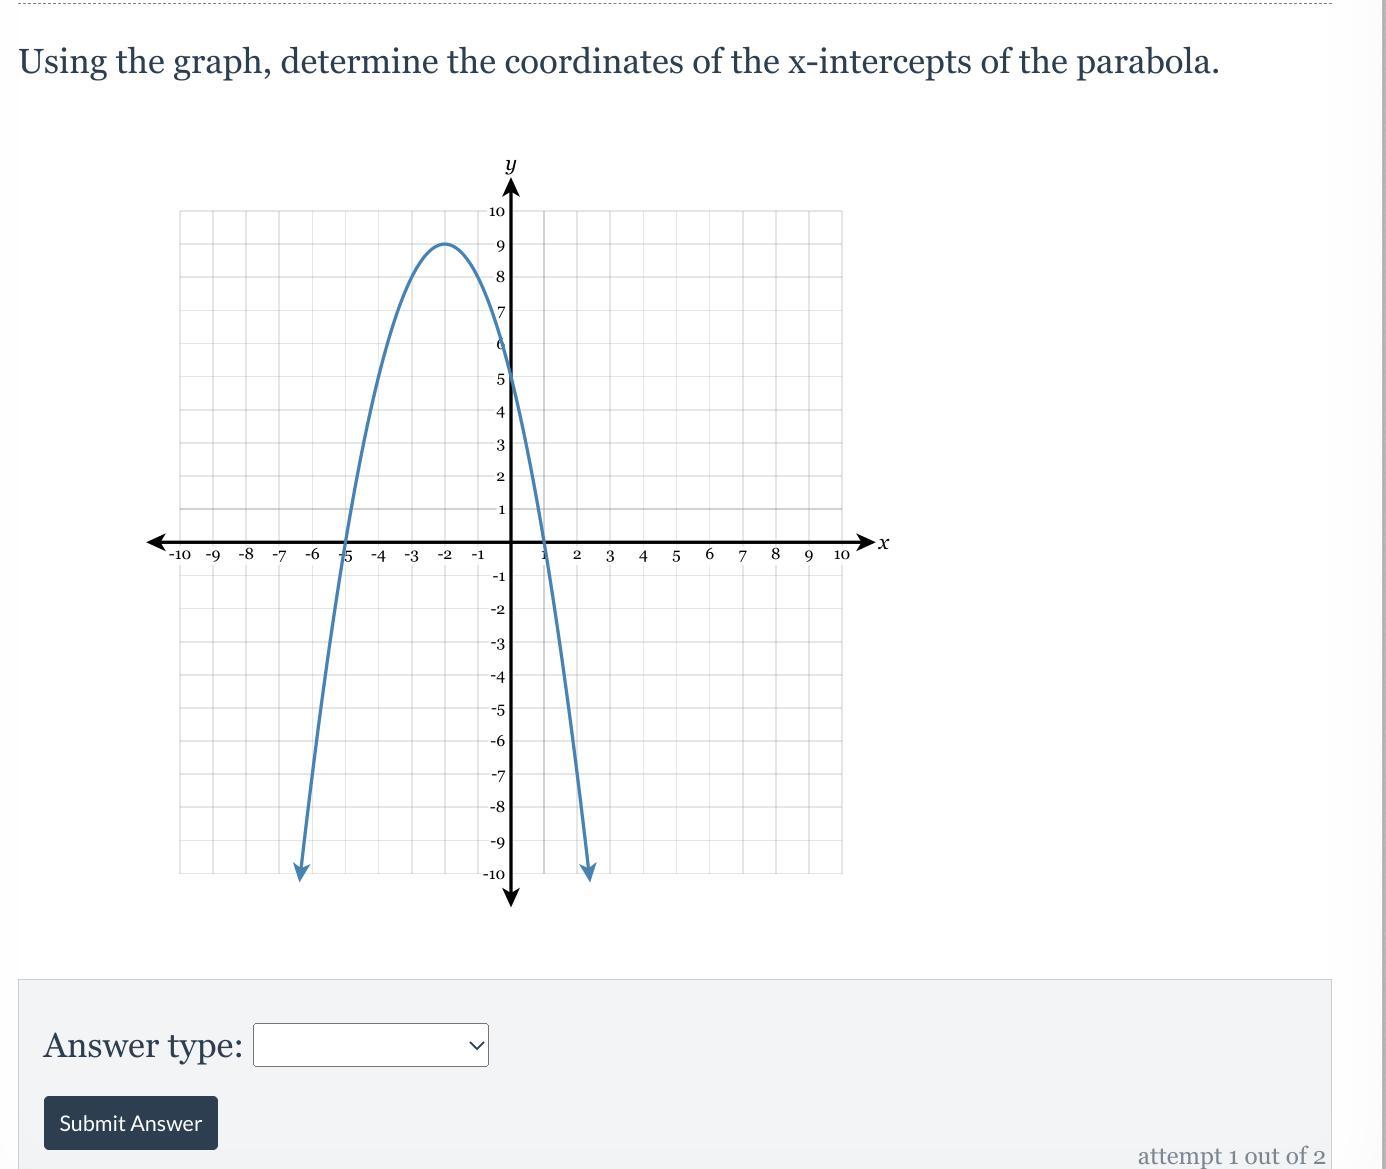 Using The Graph, Determine The Coordinates Of The X-intercepts Of The Parabola.